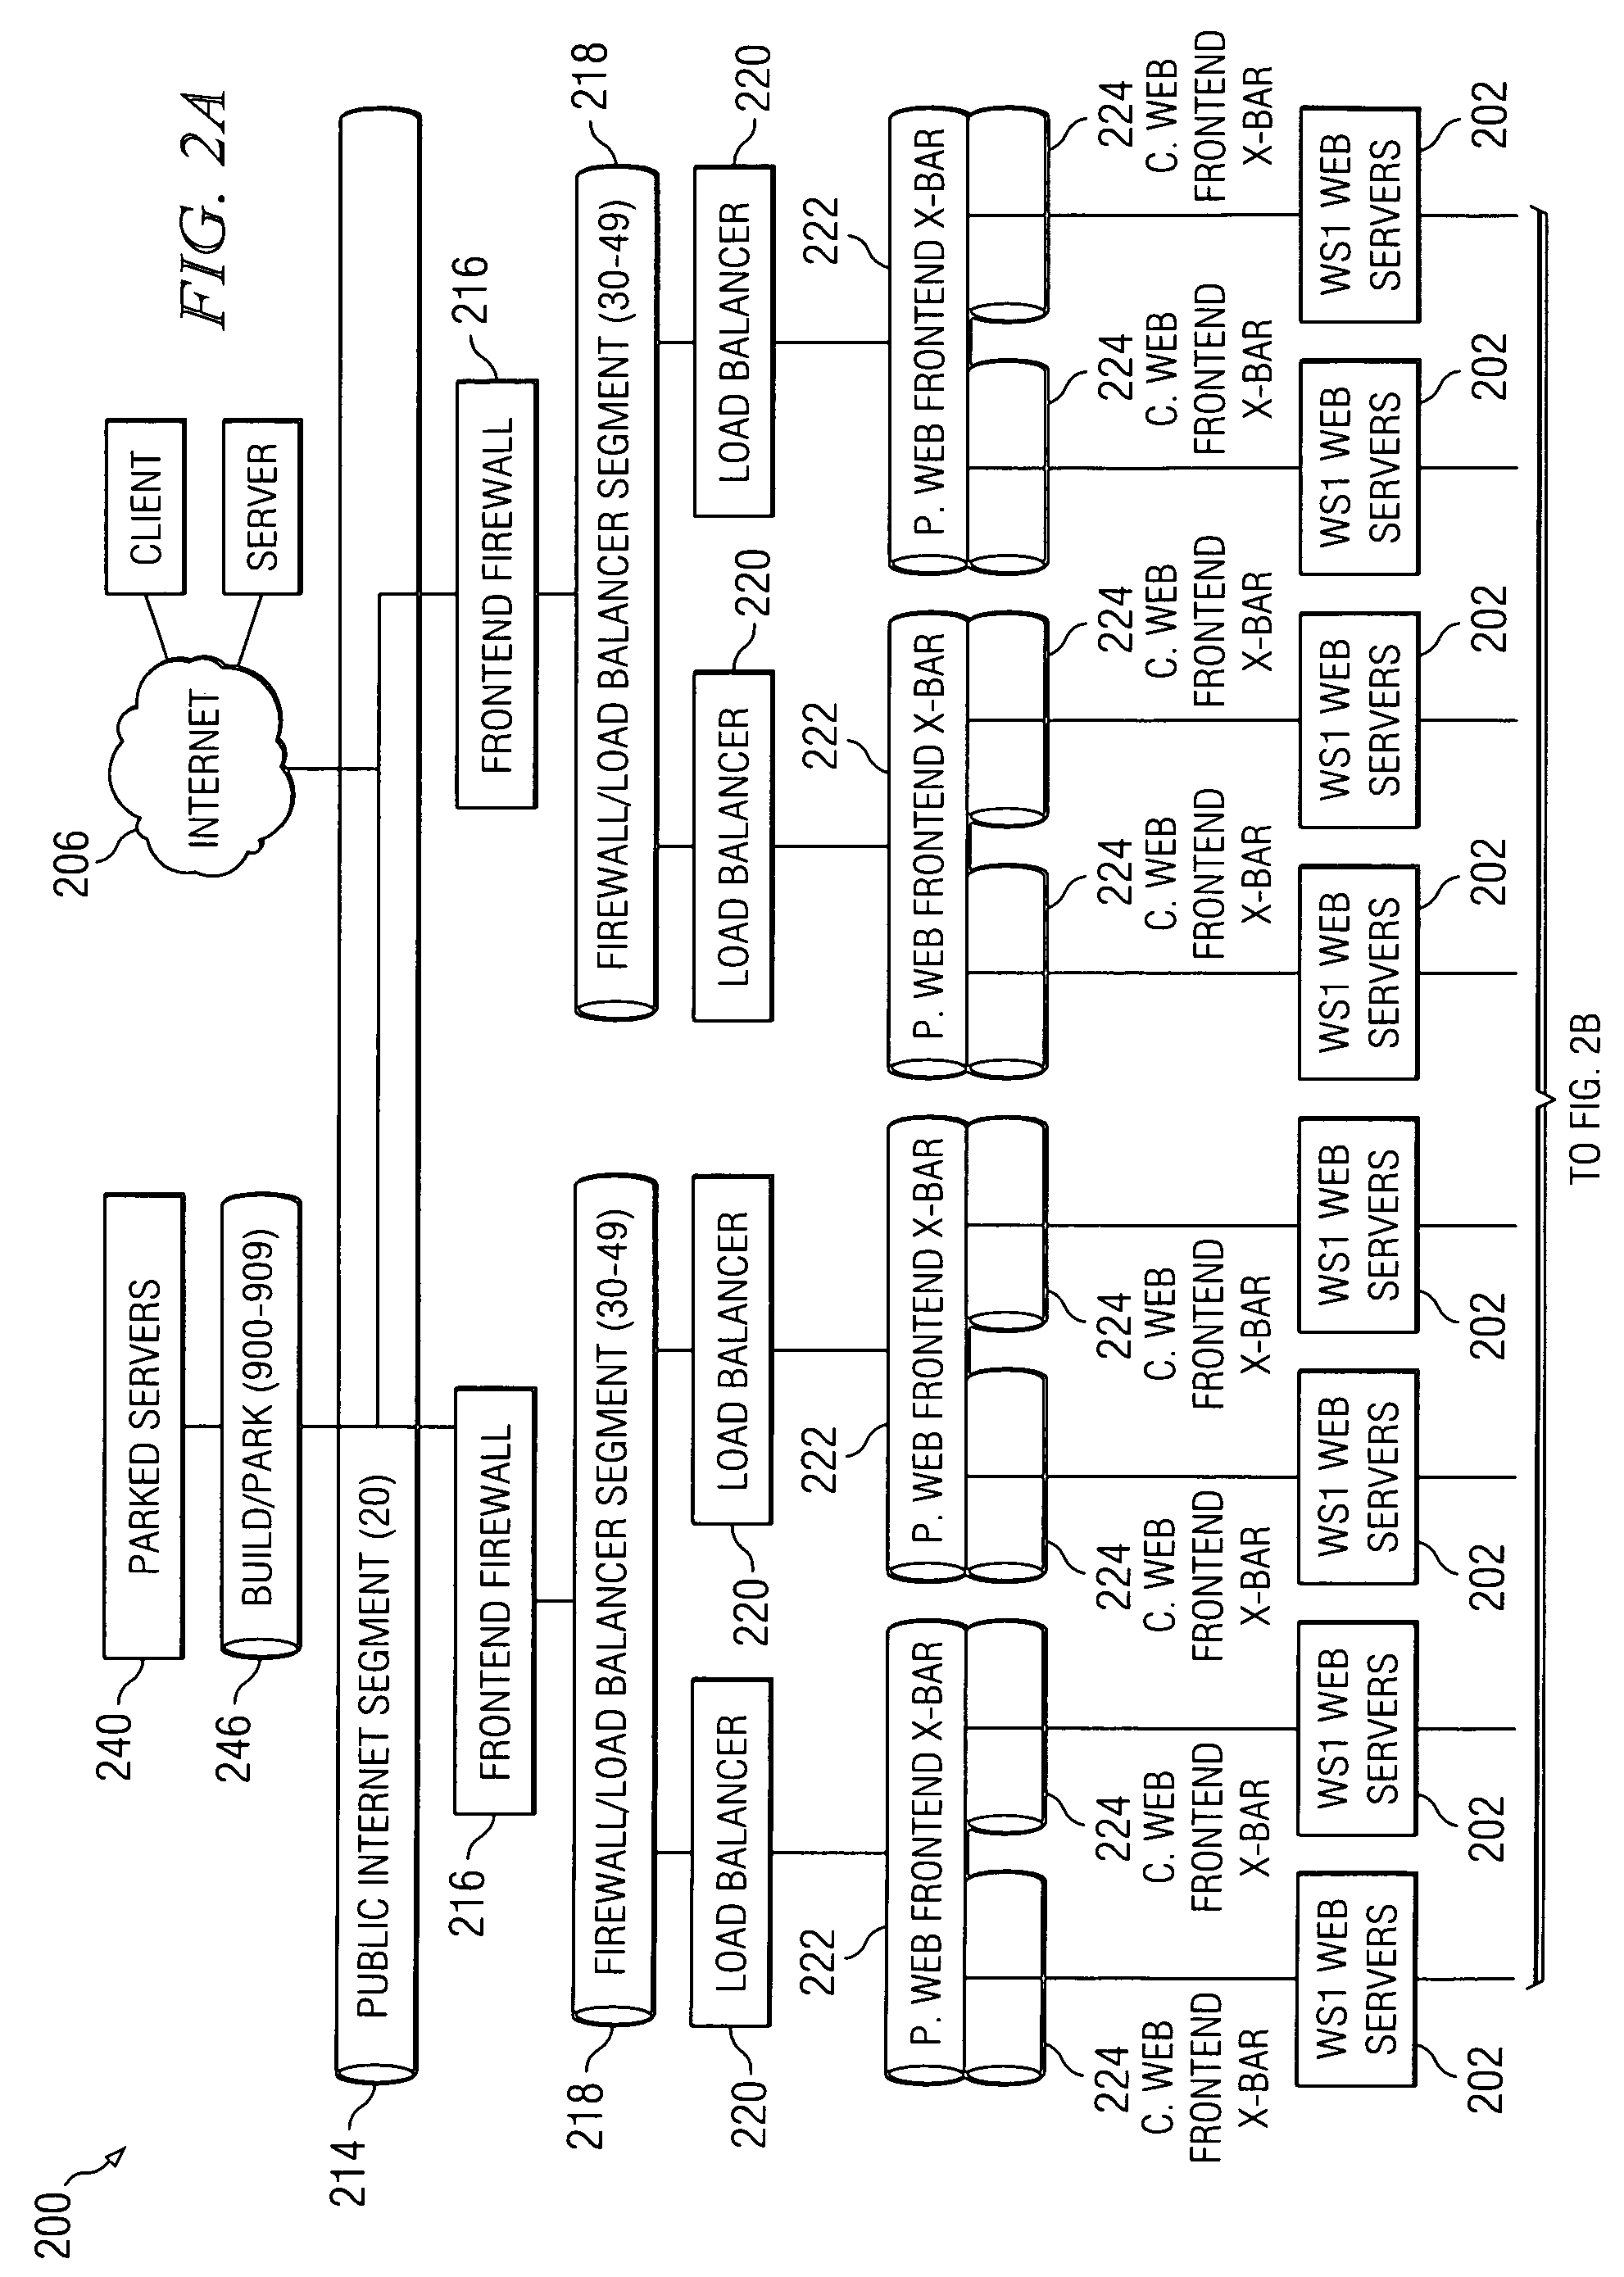 Method, system, and product for defining and managing provisioning states for resources in provisioning data processing systems